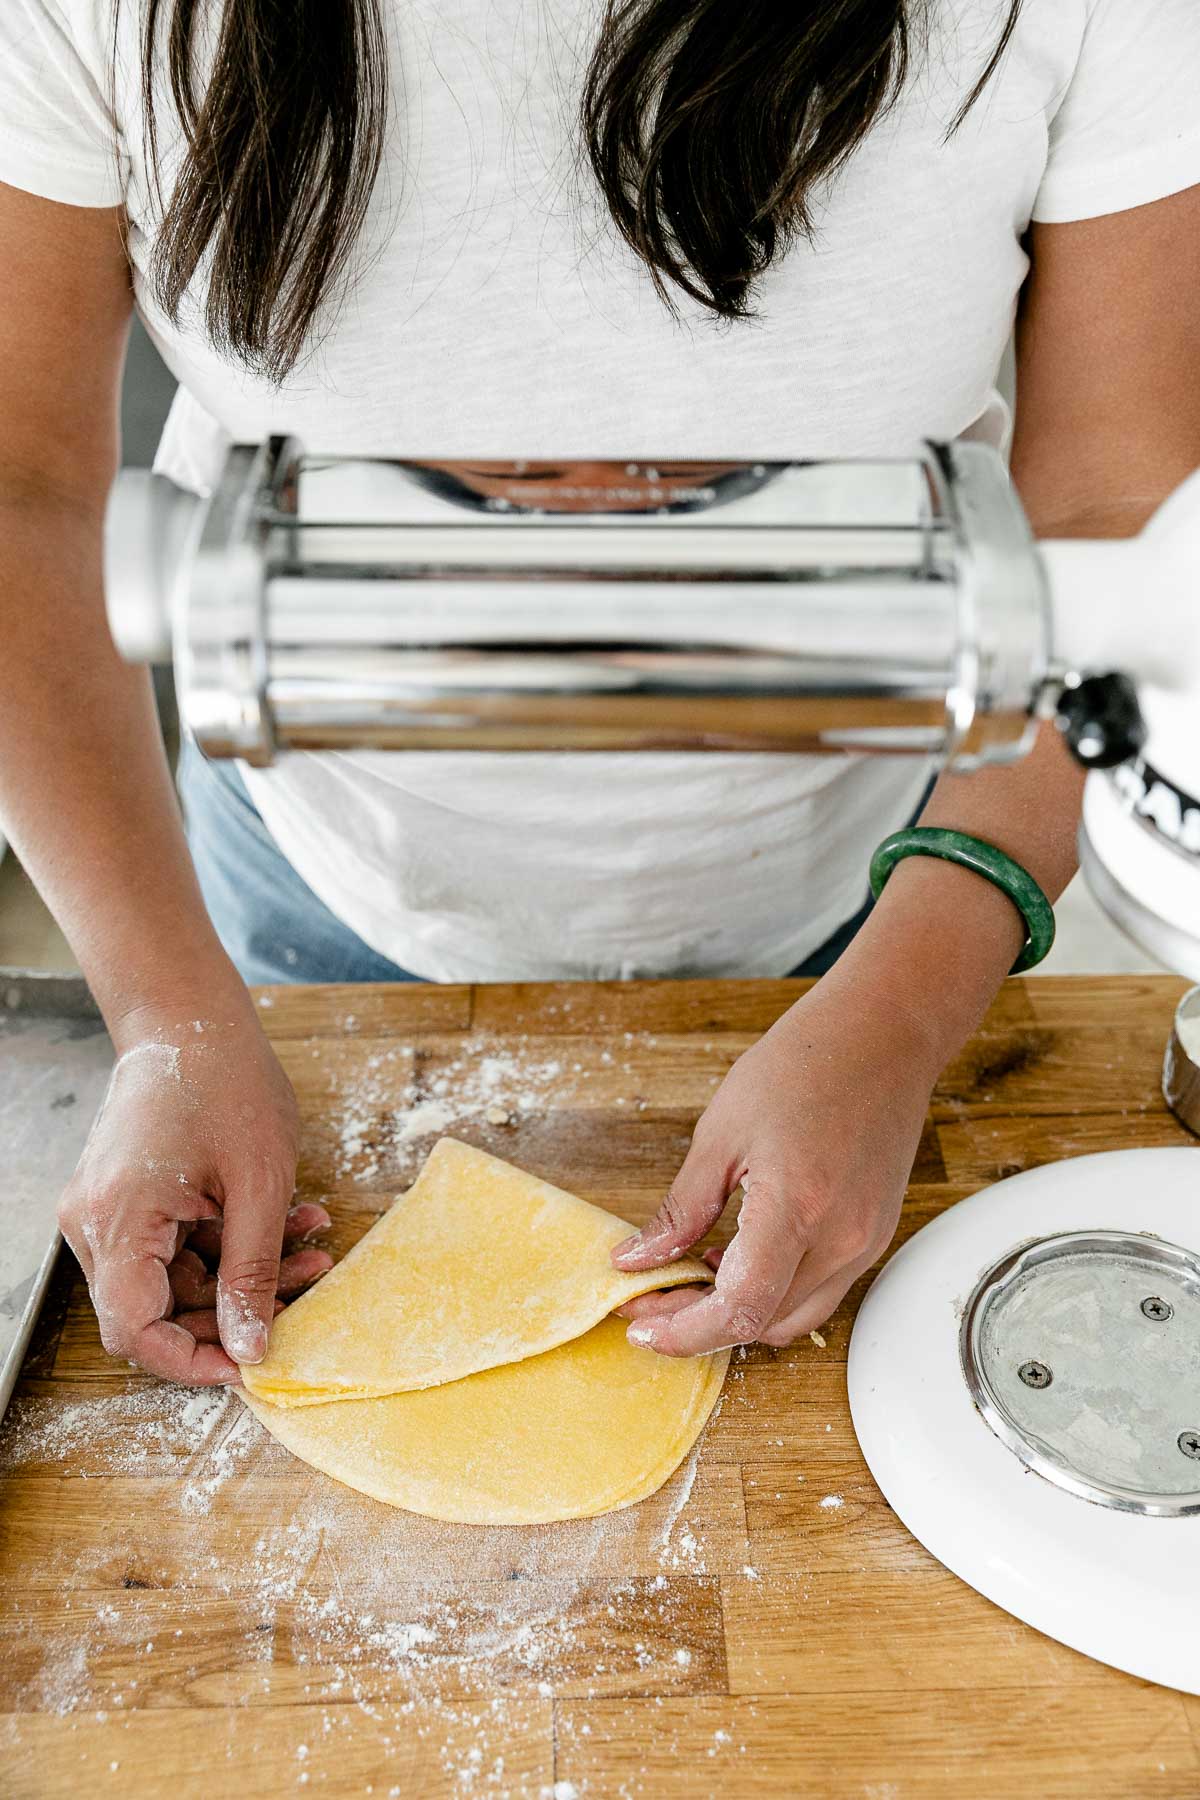 Jess of Plays Well With Butter uses her hands to fold homemade pasta dough in half atop a flour dusted butcher block countertop. ​A KitchenAid Stand Mixer with a pasta rolling attachment is set up to be used to roll out the pasta dough and an aluminum baking sheet also sits on top of the countertop.